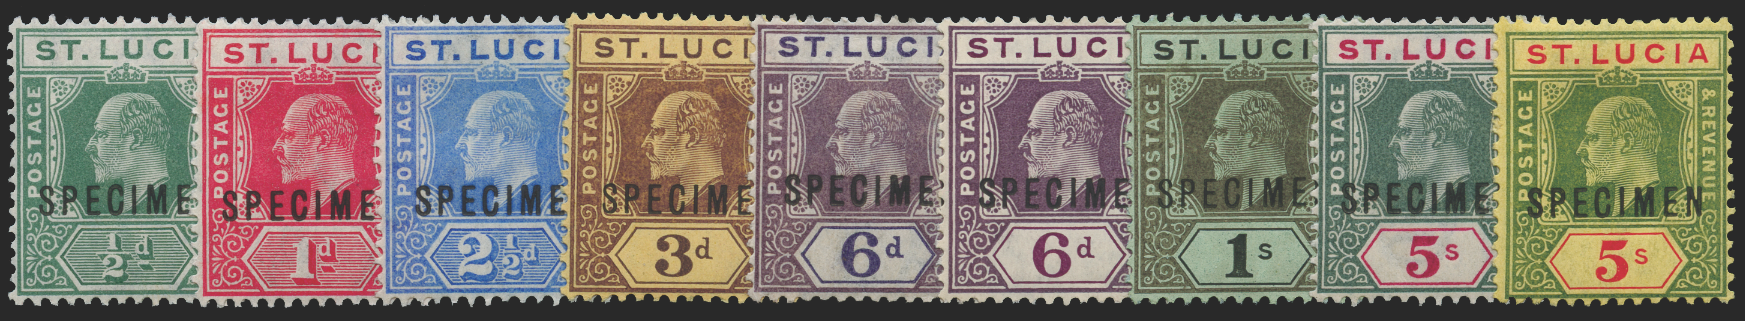 ST LUCIA 1904-10 set of 9 to 5s Specimens, SG65s/77s